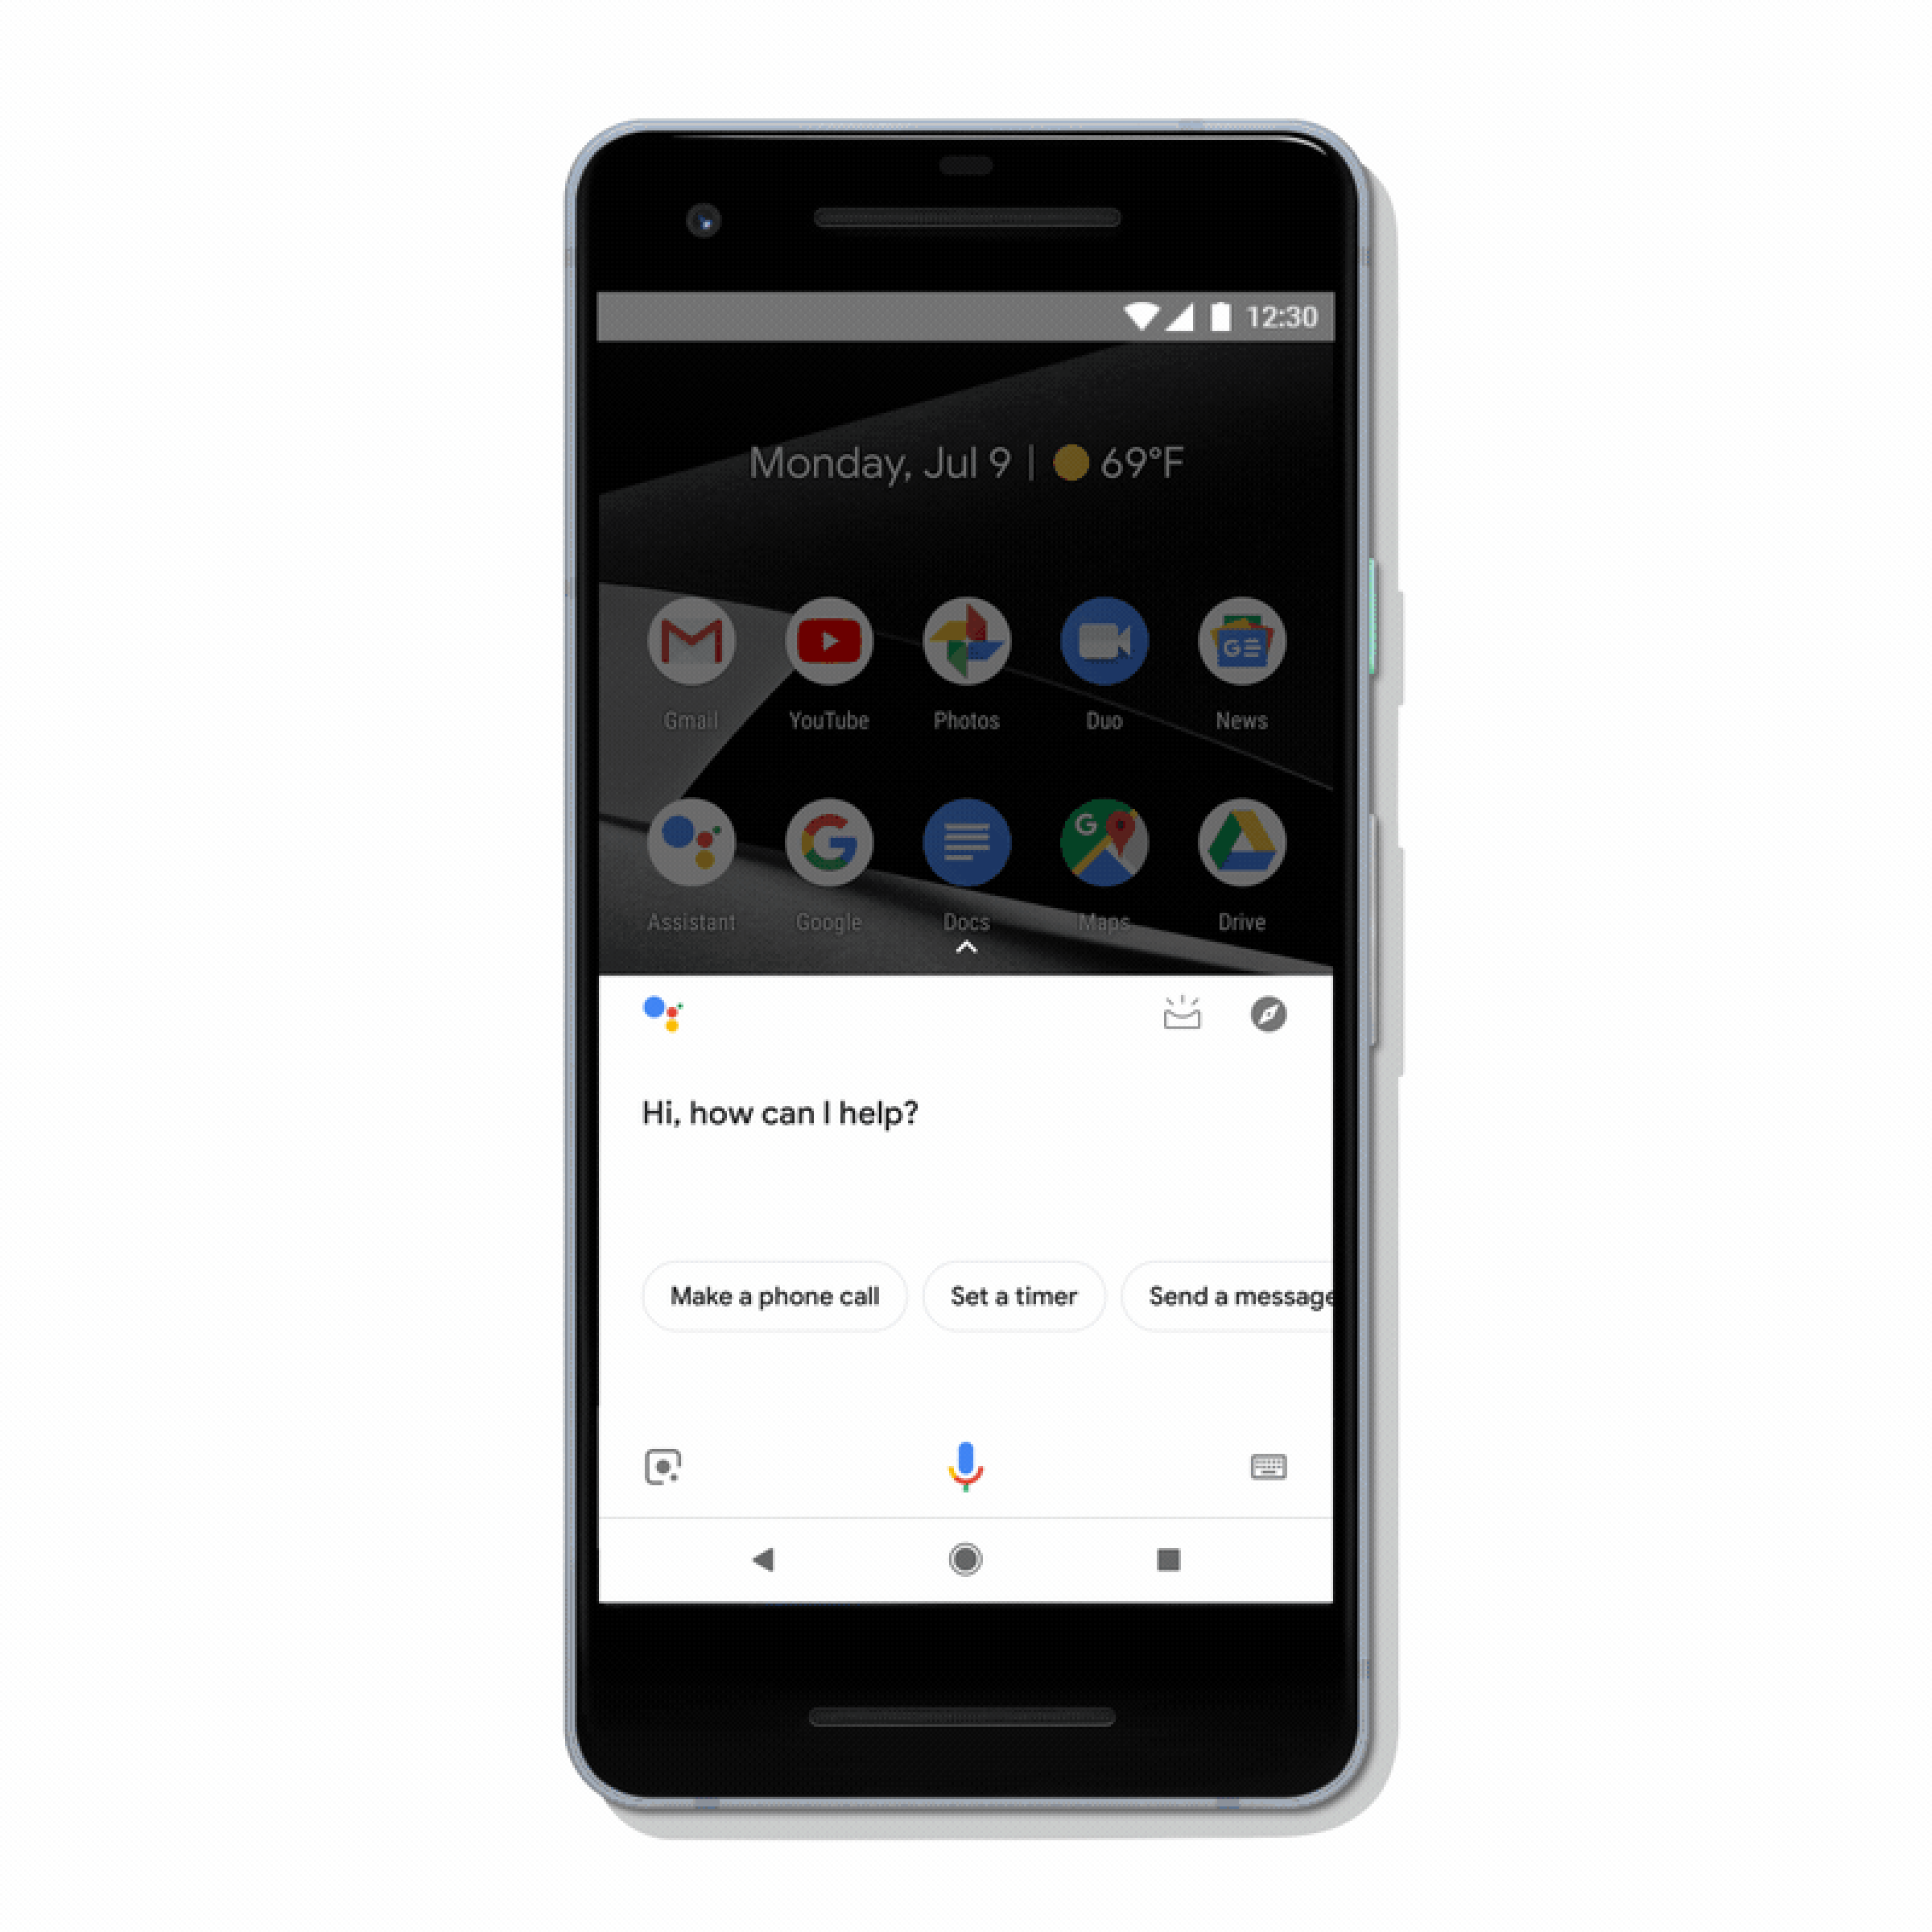 You’ll also now be able to swipe up from the Assistant on Android to get an overview of your day and recent voice interactions.